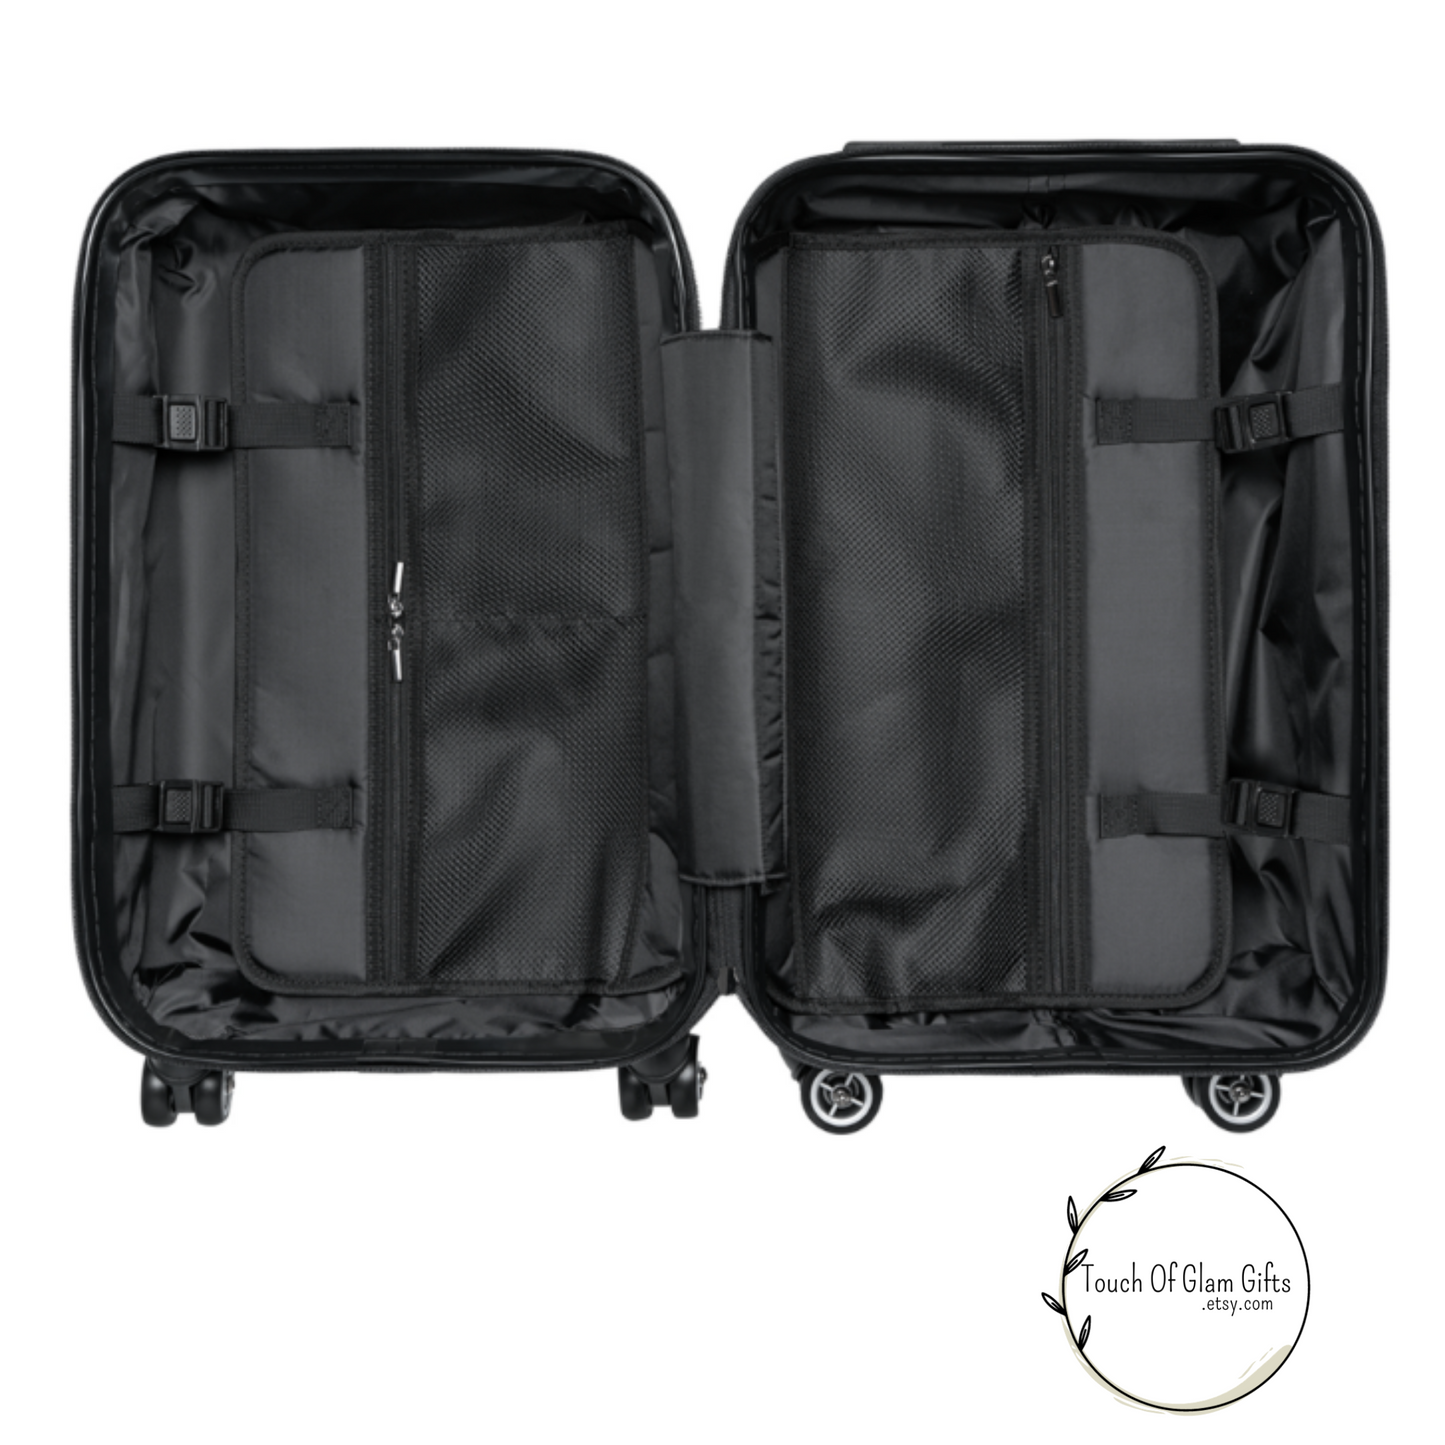 The inside of our luggage all come with dividers on both sides and clasps to hold the dividers so your belongings stay in place when you close the suitcase.